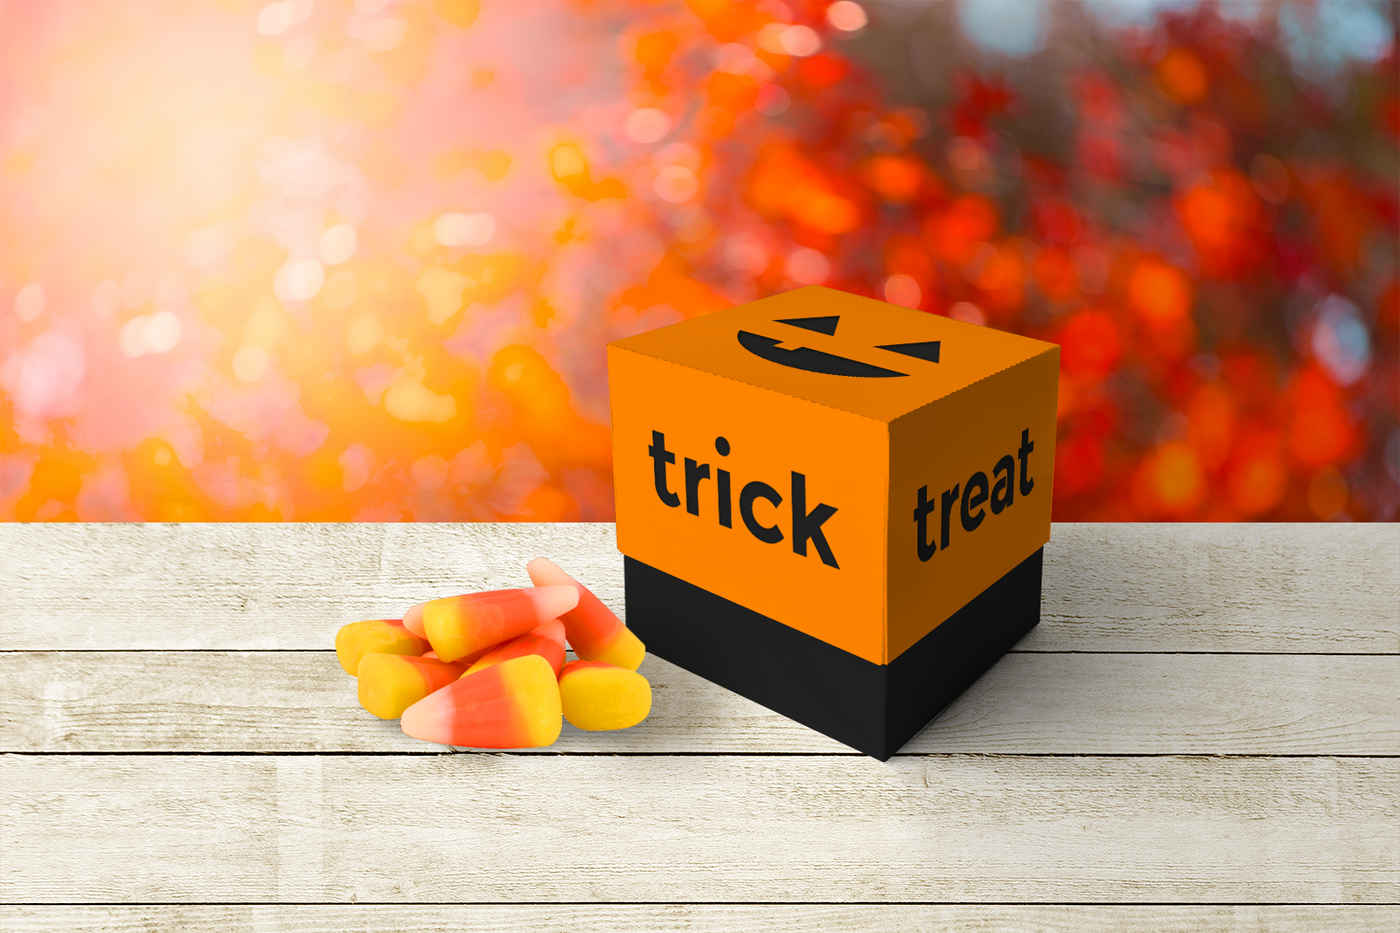 Cube shaped box with a jack-o-lantern pumpkin face cutout at the top, and the words "trick" and "treat" along the sides.